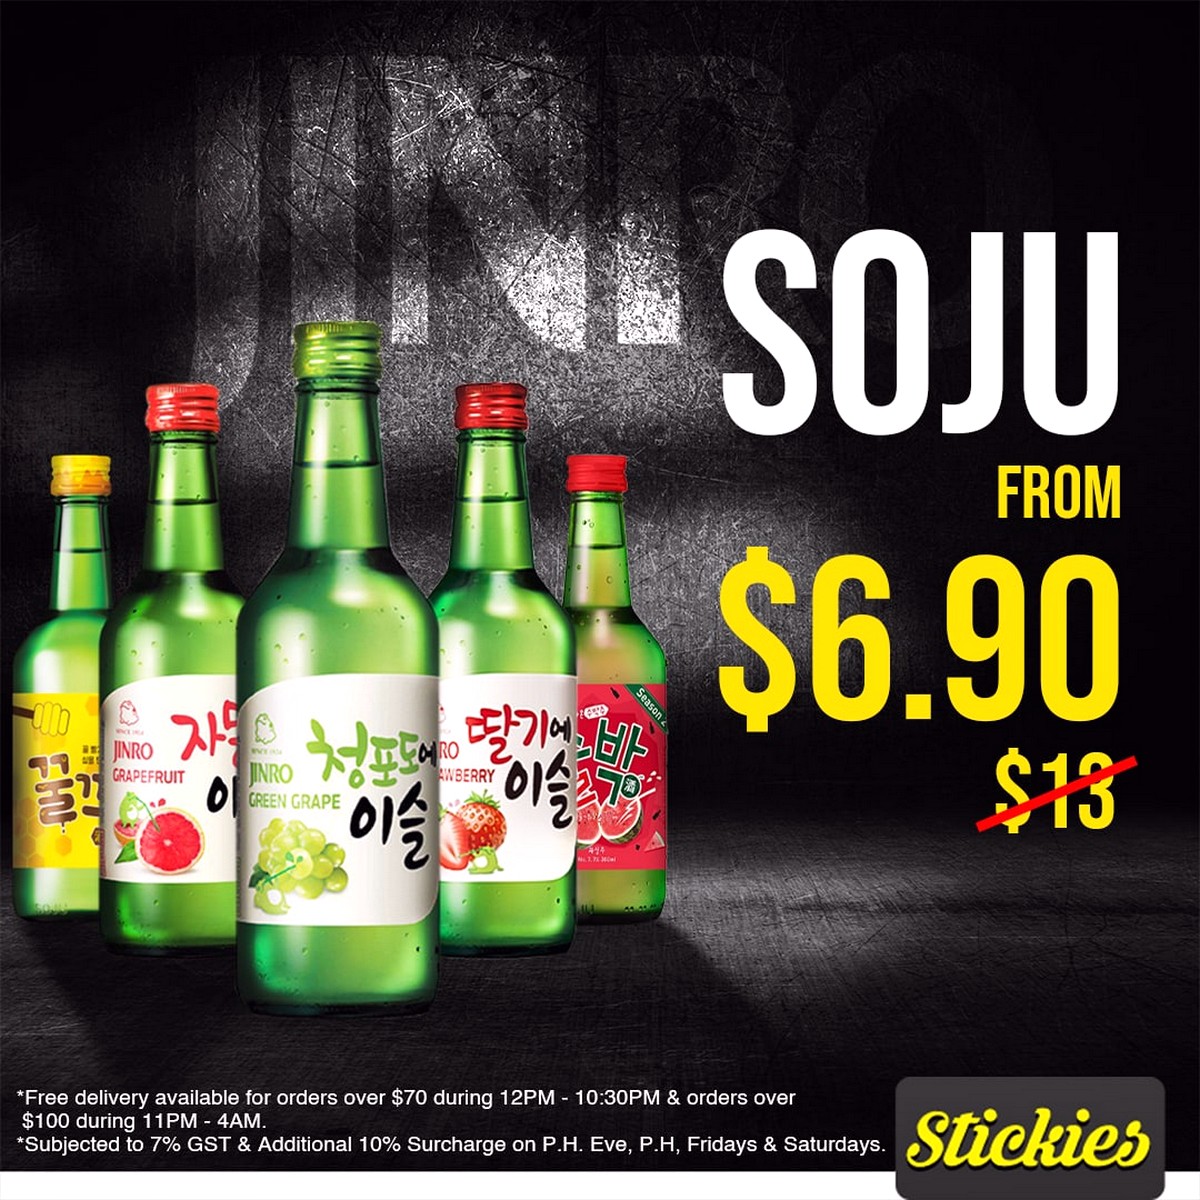 Stickies-Bar-Sitewide-Promo-Singapore-Beer-Wine-Soju-Alcoholic-Drinks-Western-Food-Fries-Burger-Discounts-2021-002 Today onwards: Stickies Bar Sitewide Promo! Up to 60% off Everything! Soju from $6.90 only!